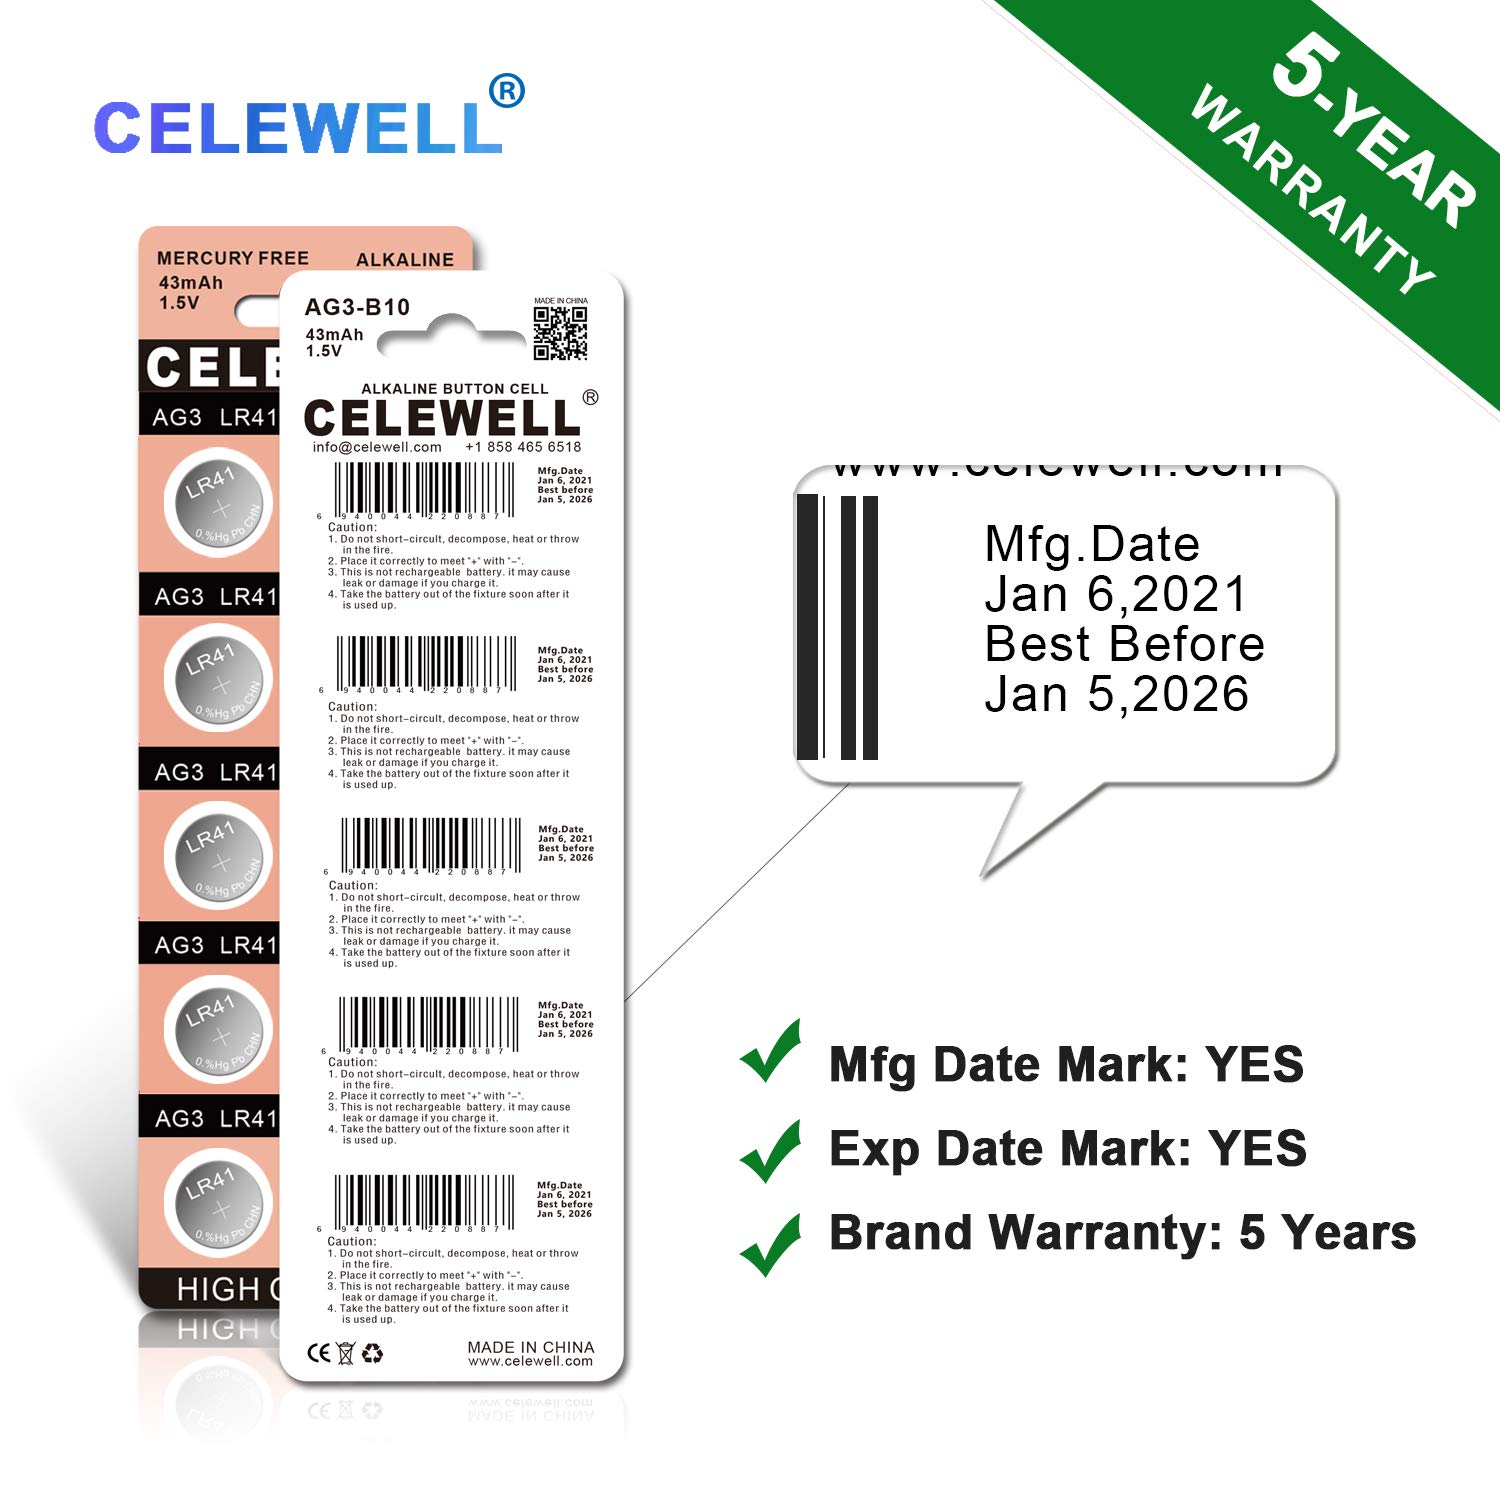 【5 Year Warranty】 CELEWELL 20pcs LR41 Battery for Digital Thermometer AG3 L736 GP192 392 Button Cell Batteries 43mAh